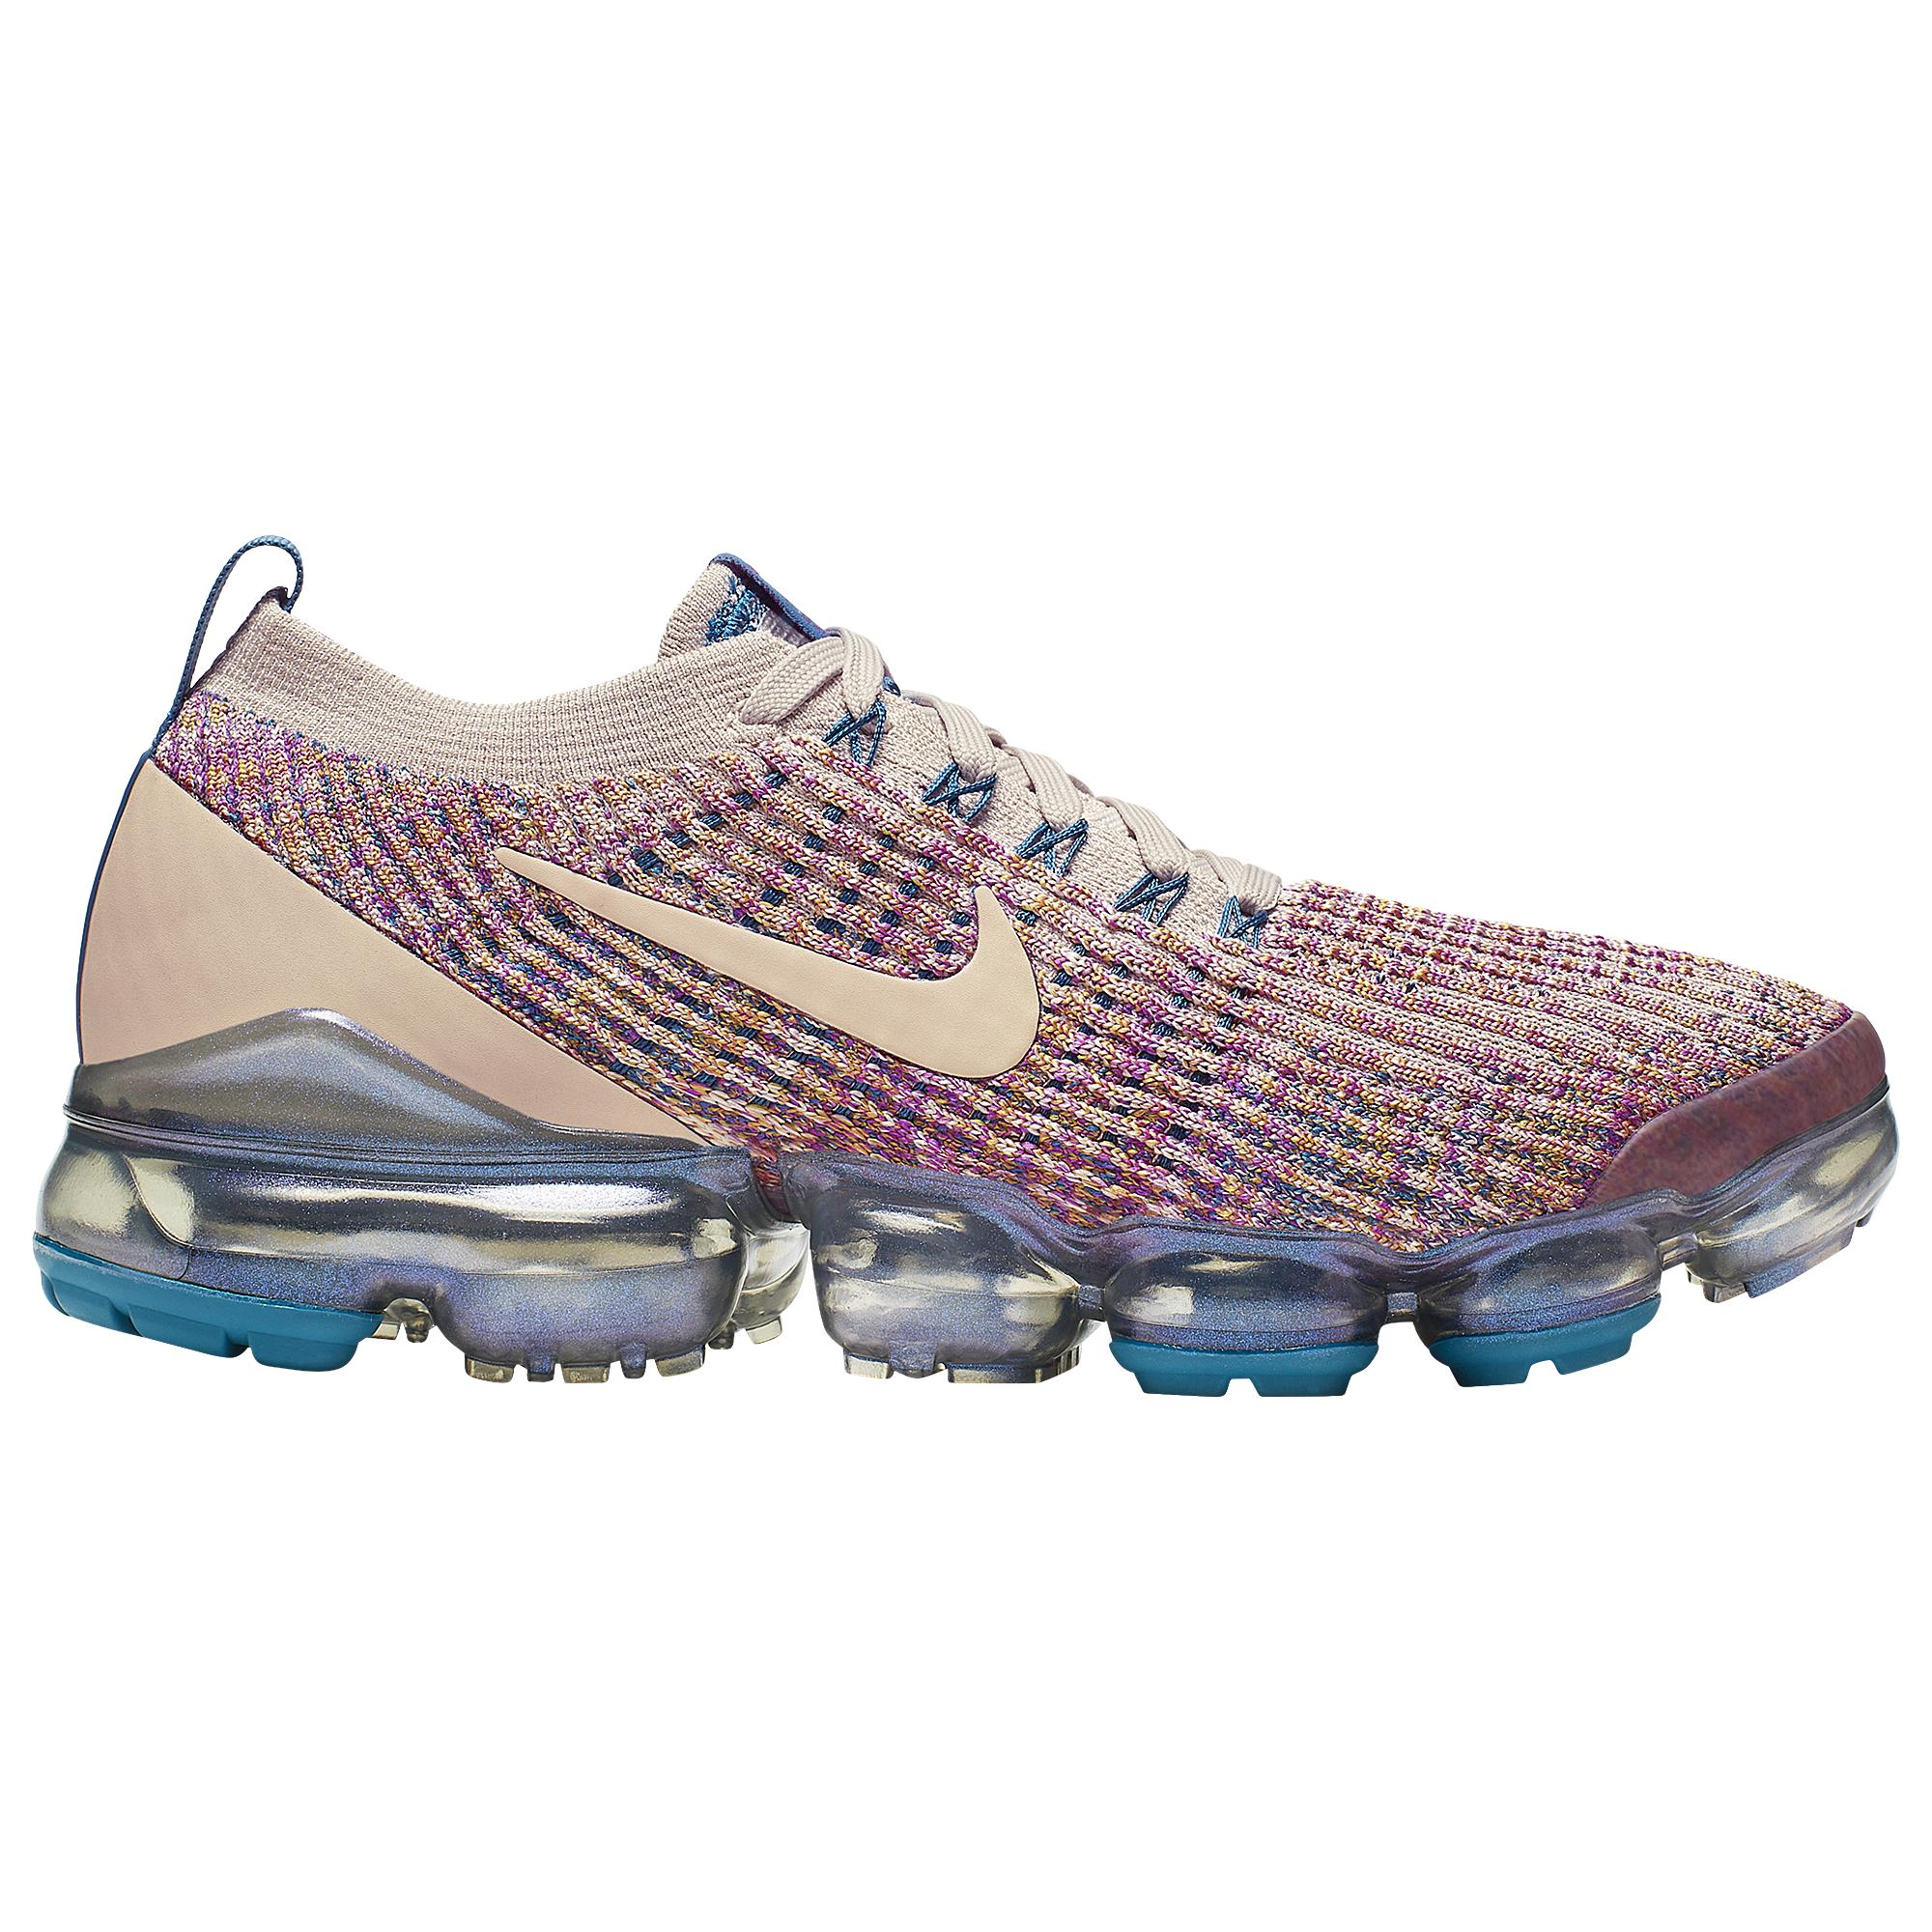 Nike Rubber Air Vapormax Flyknit 3 Casual Trainers in Desert Sand/Vivid ...